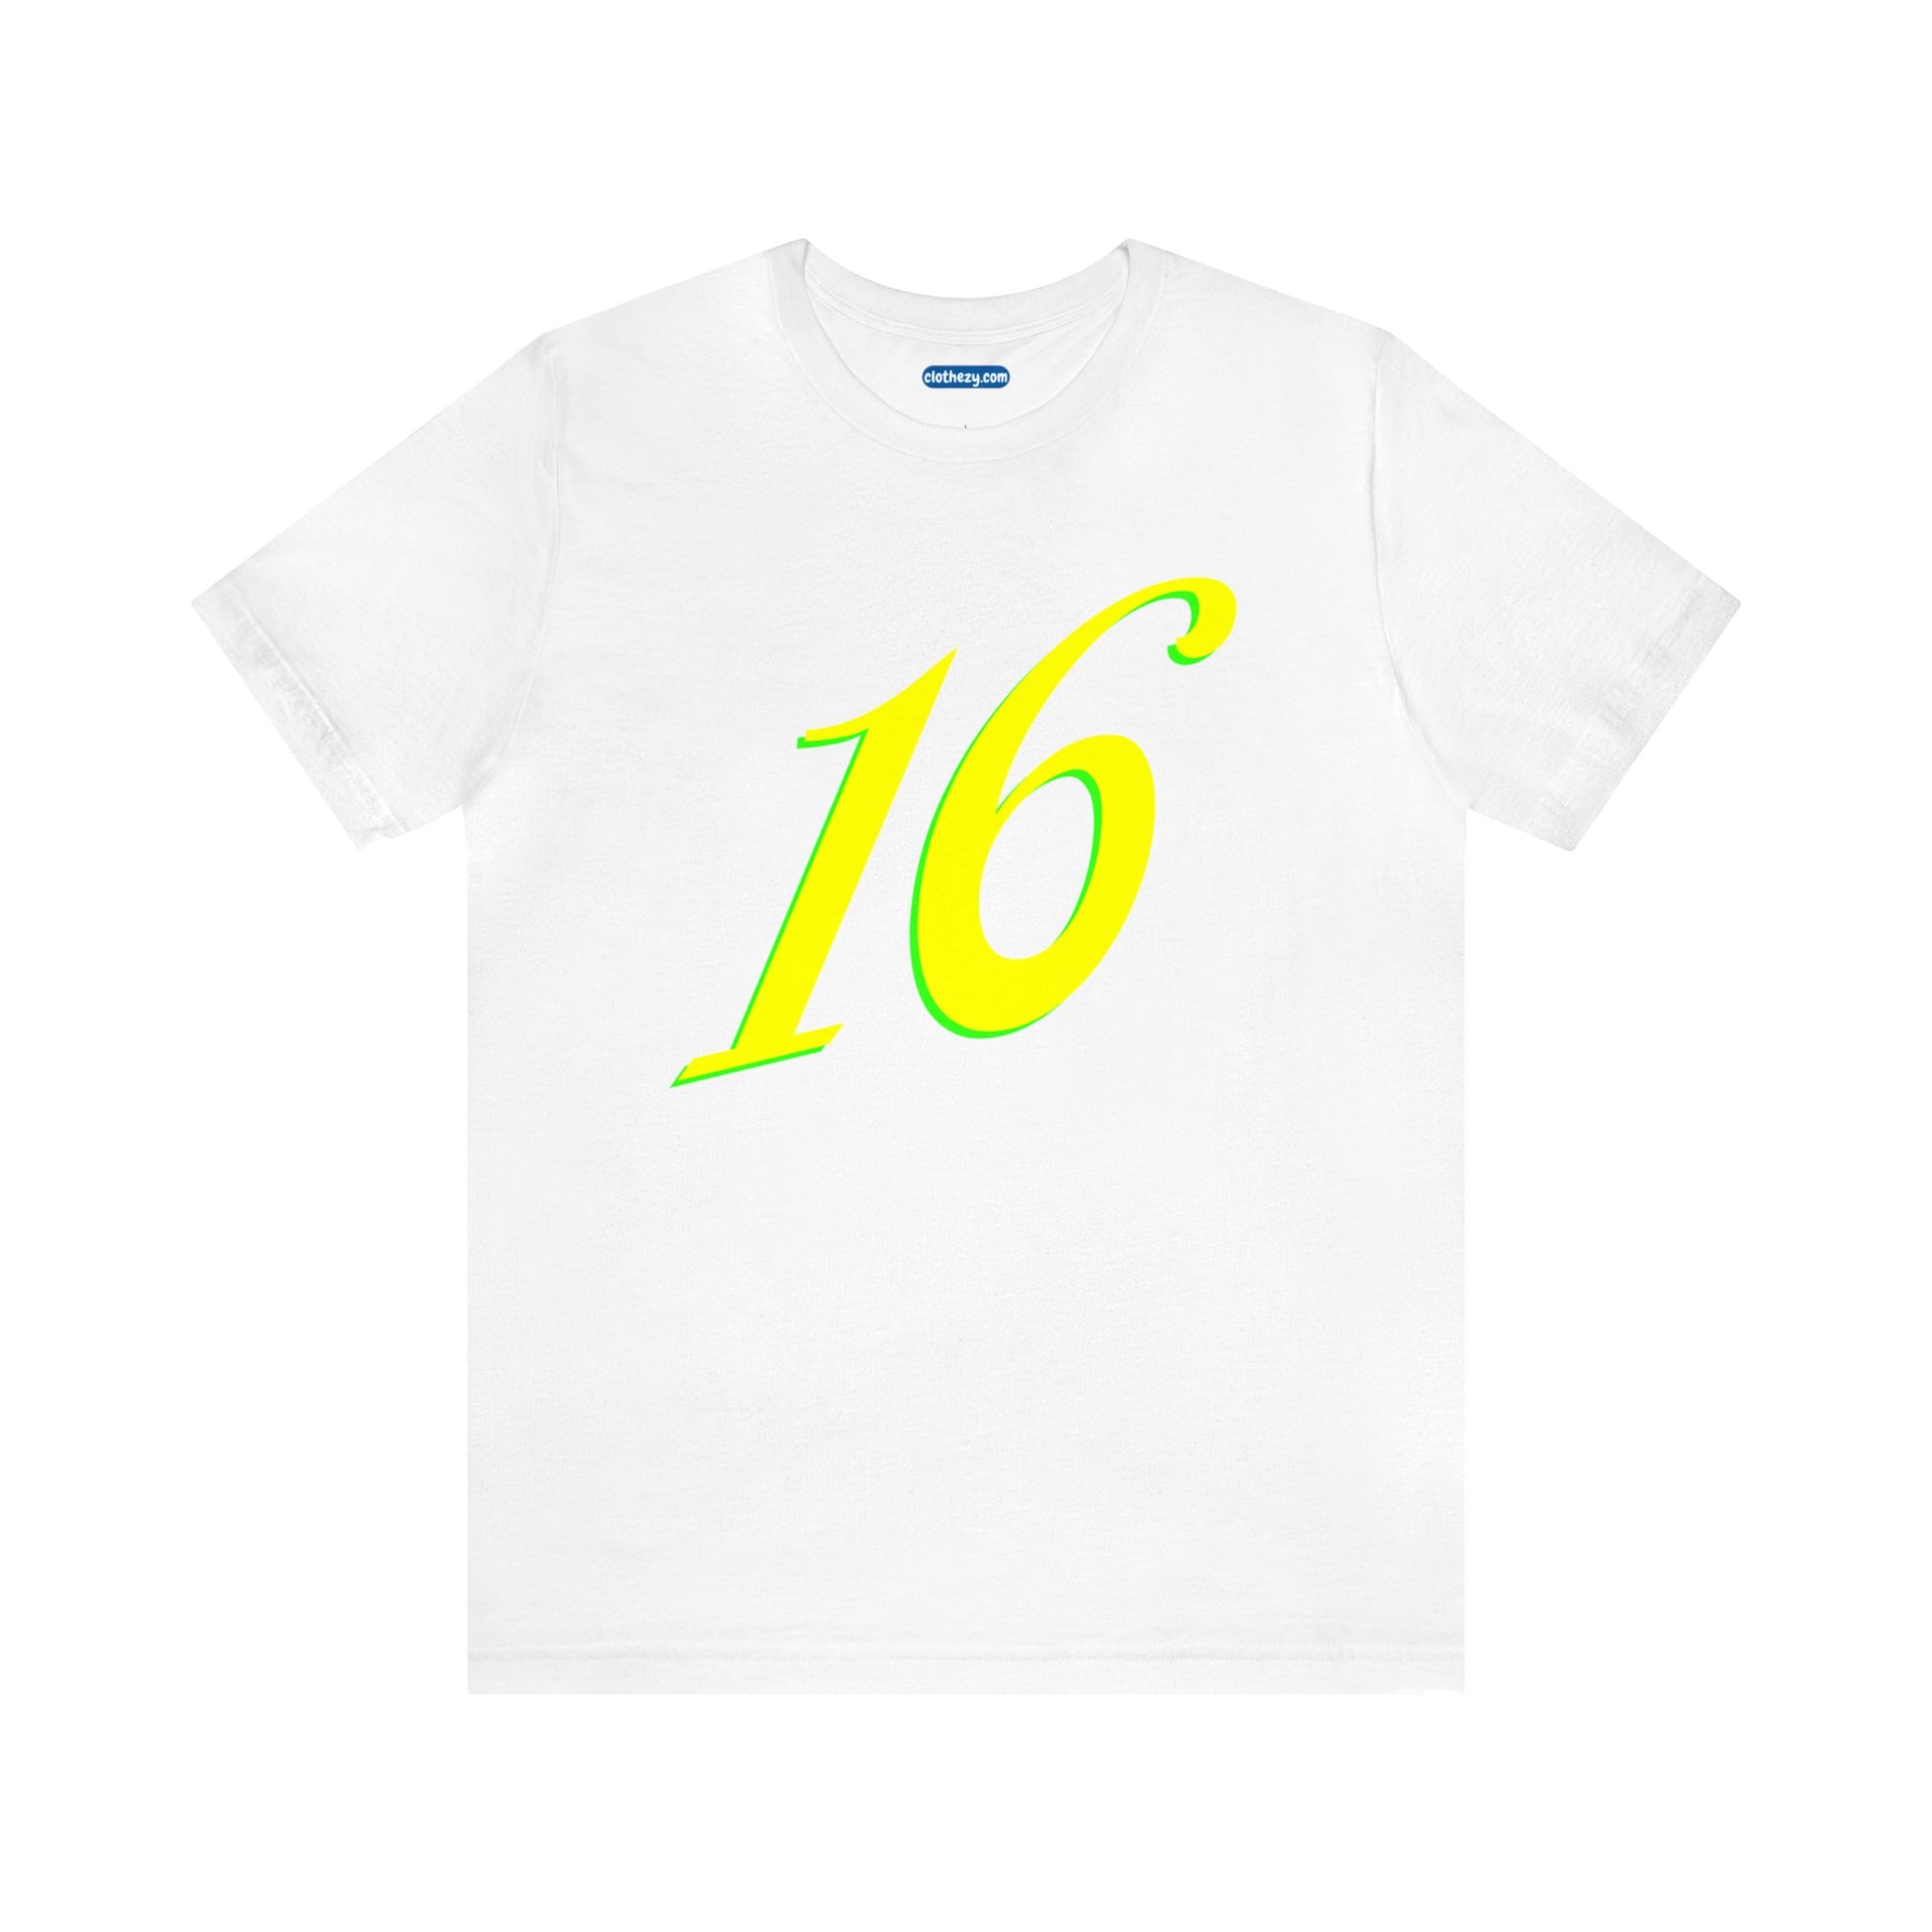 Number 16 Design - Soft Cotton Tee for birthdays and celebrations, Gift for friends and family, Multiple Options by clothezy.com in White Size Small - Buy Now